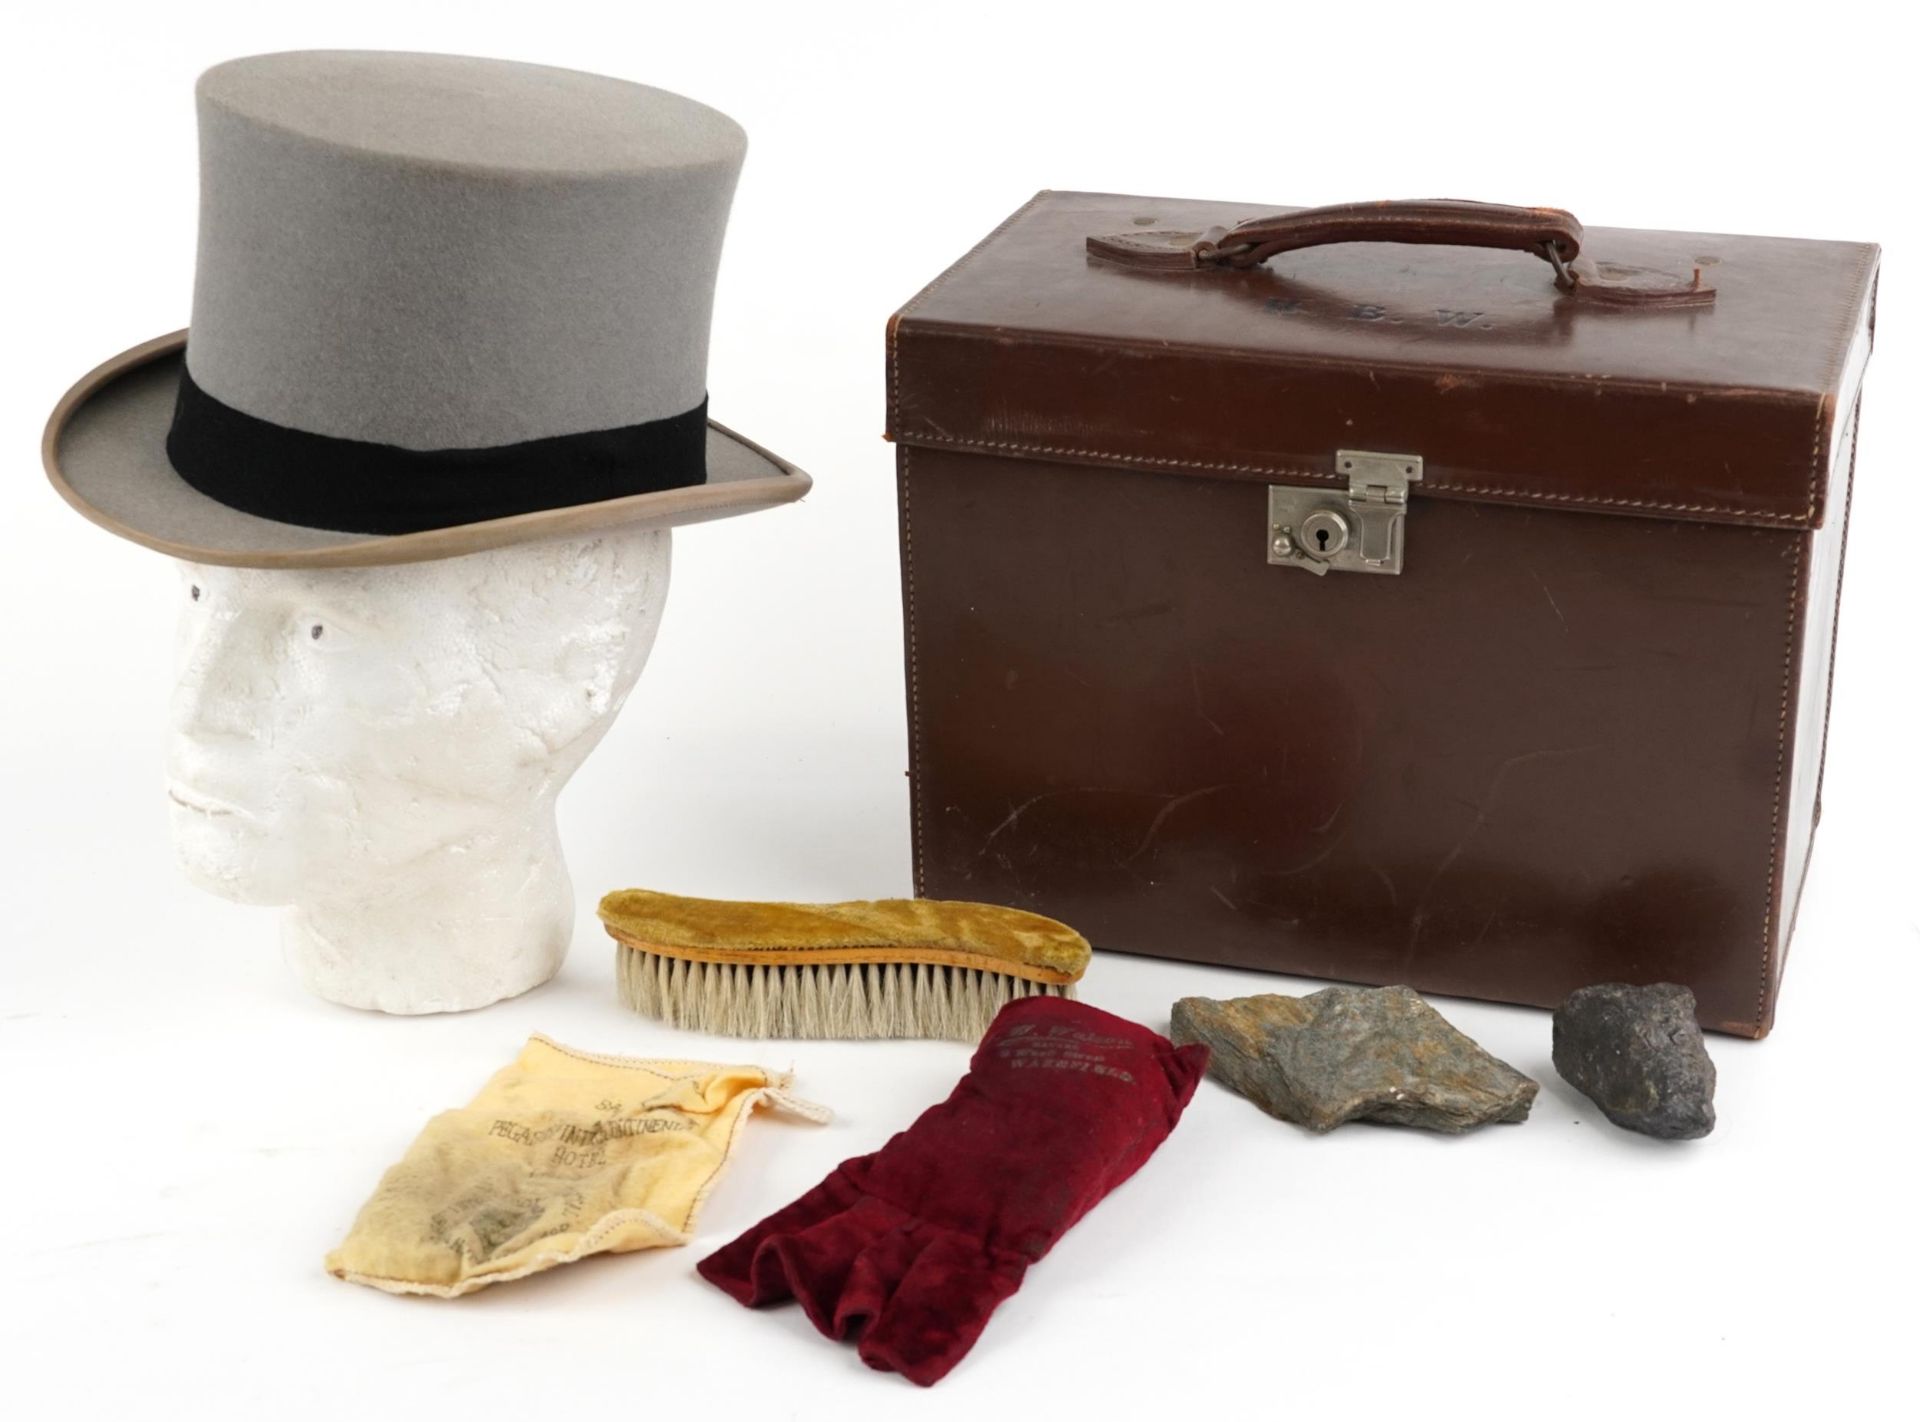 Scott & Co top hat housed in a brown leatherette travel box, the top hat interior size 21cm x 17cm : - Image 3 of 7